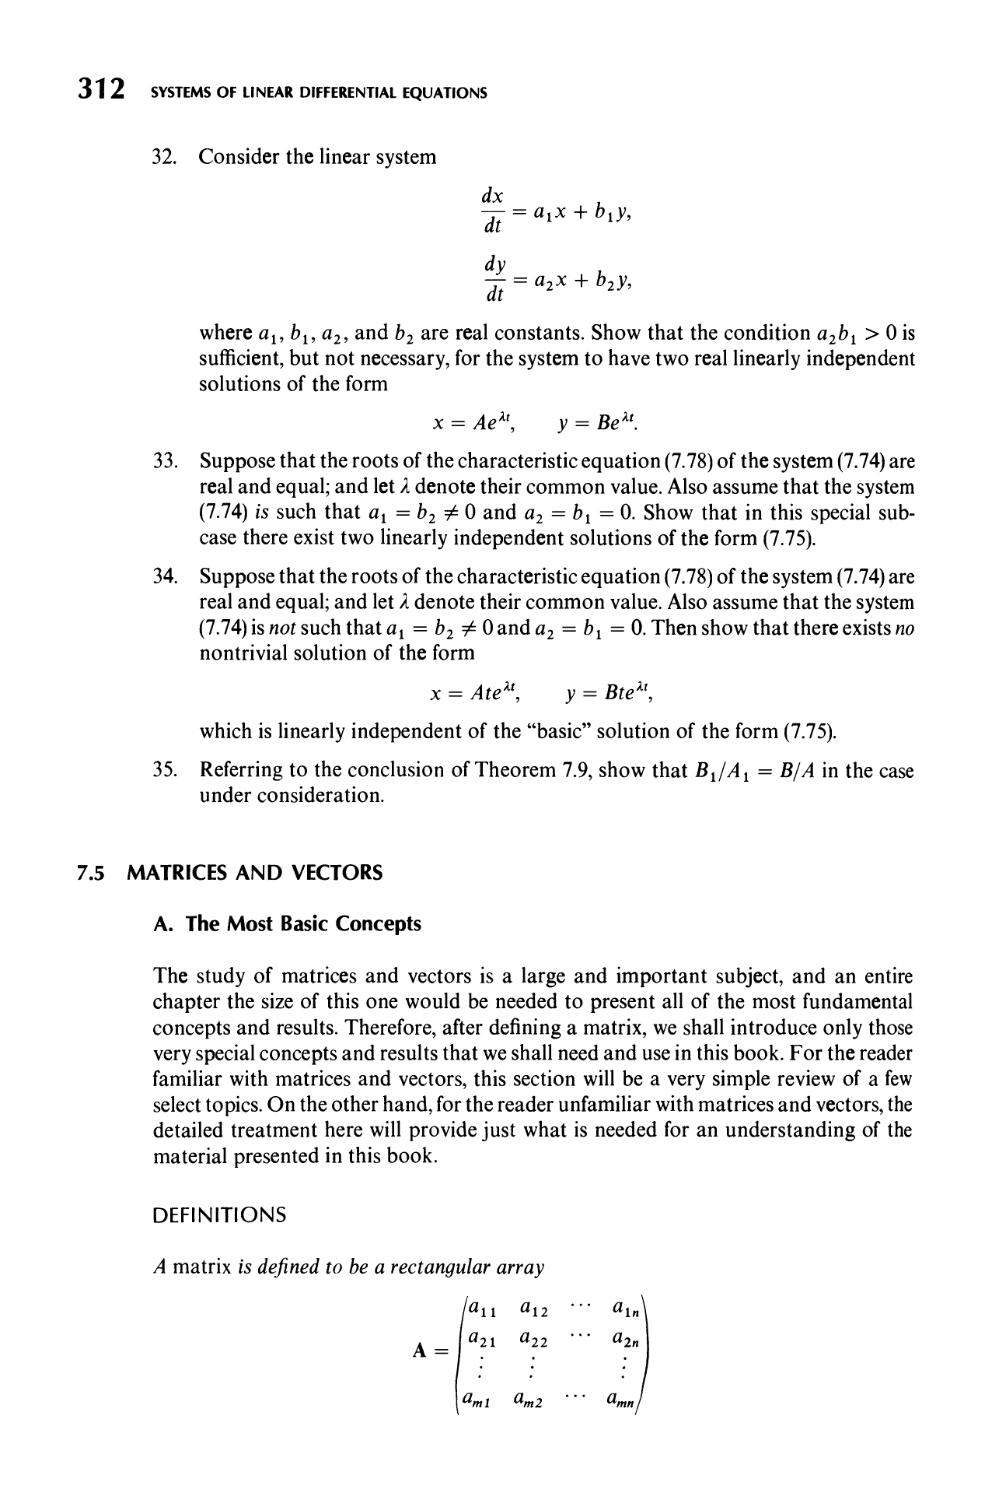 7.5  Matrices and Vectors